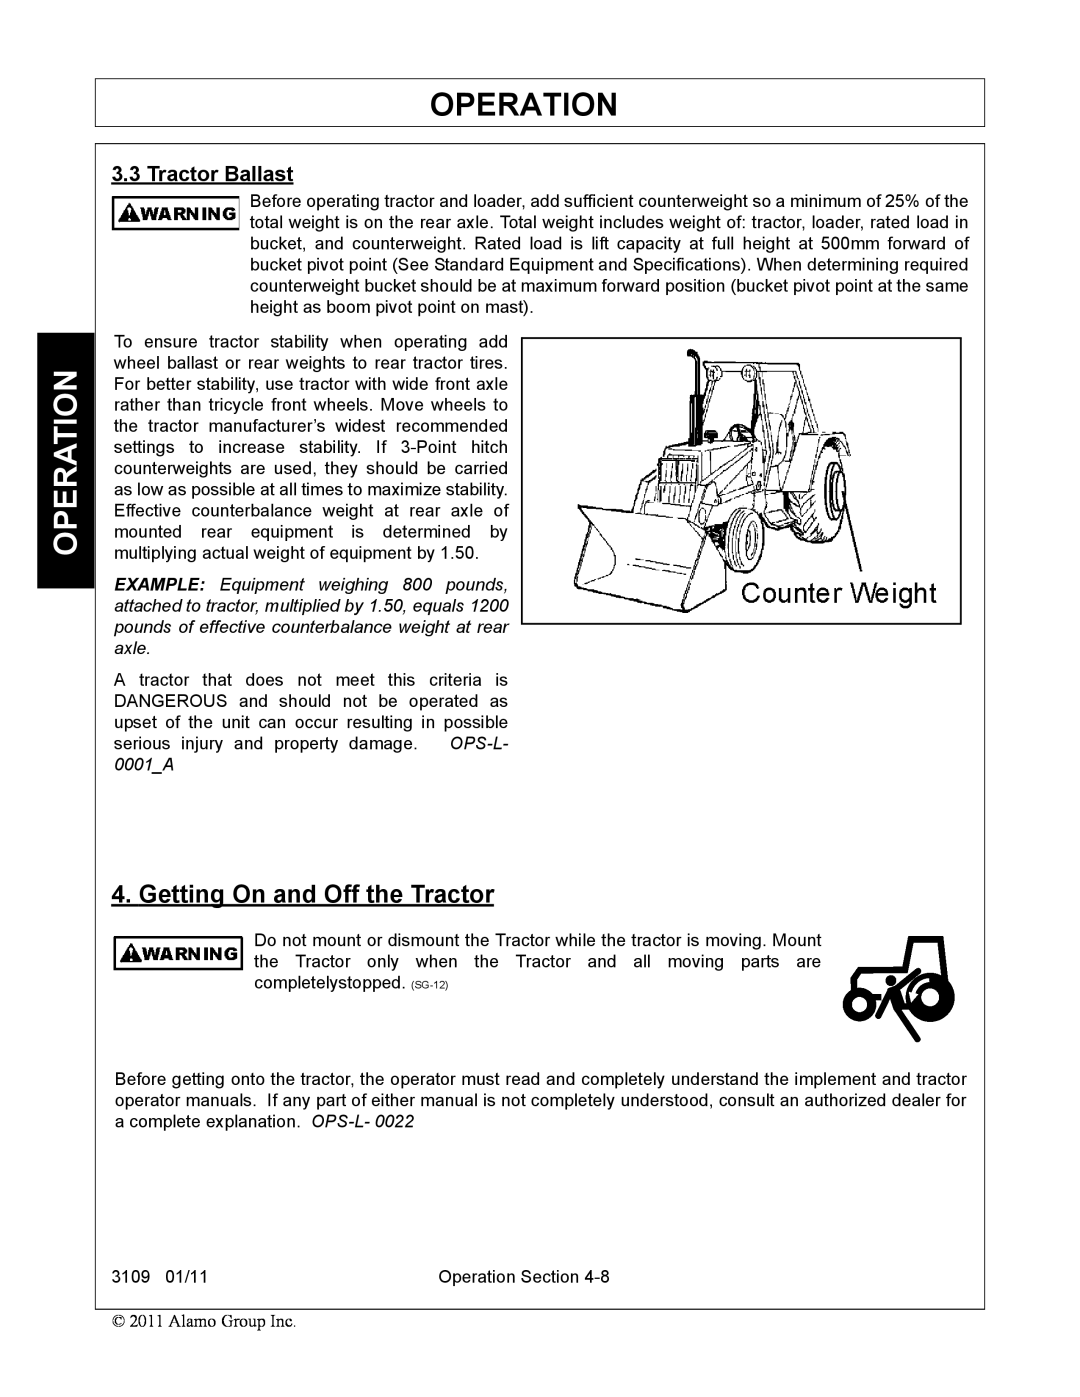 Alamo 3109 manual Operation, Getting On and Off the Tractor, Tractor Ballast 